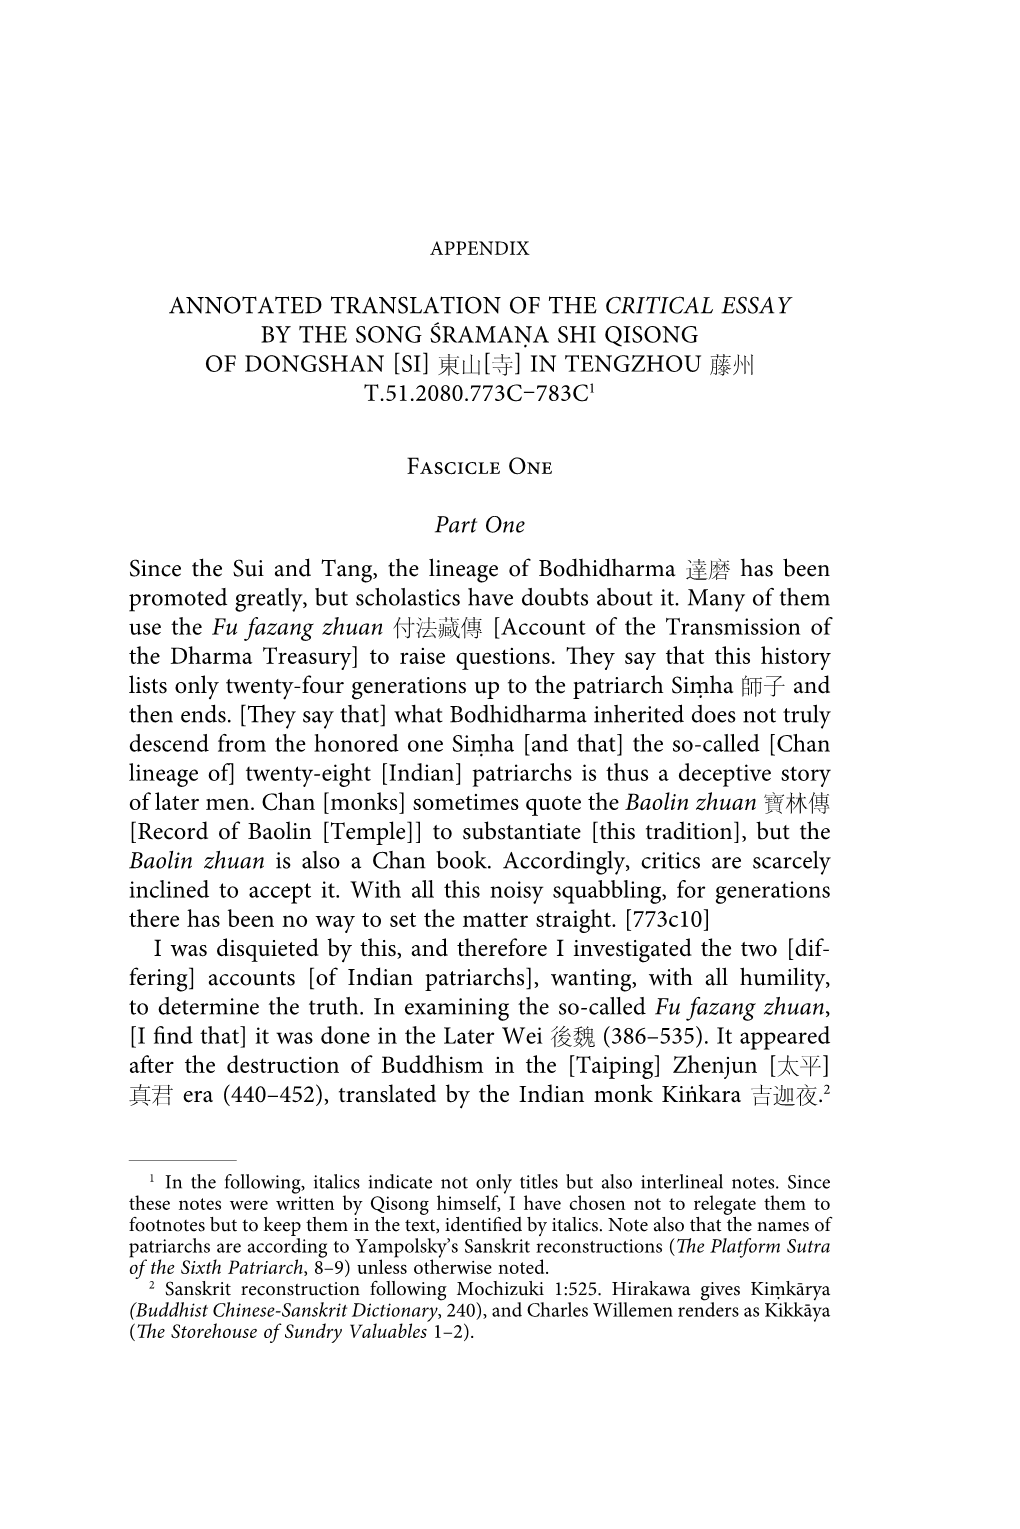 Annotated Translation of the Critical Essay by the Song Śramaṇa Shi Qisong of Dongshan Si 㚲 in Tengzhou